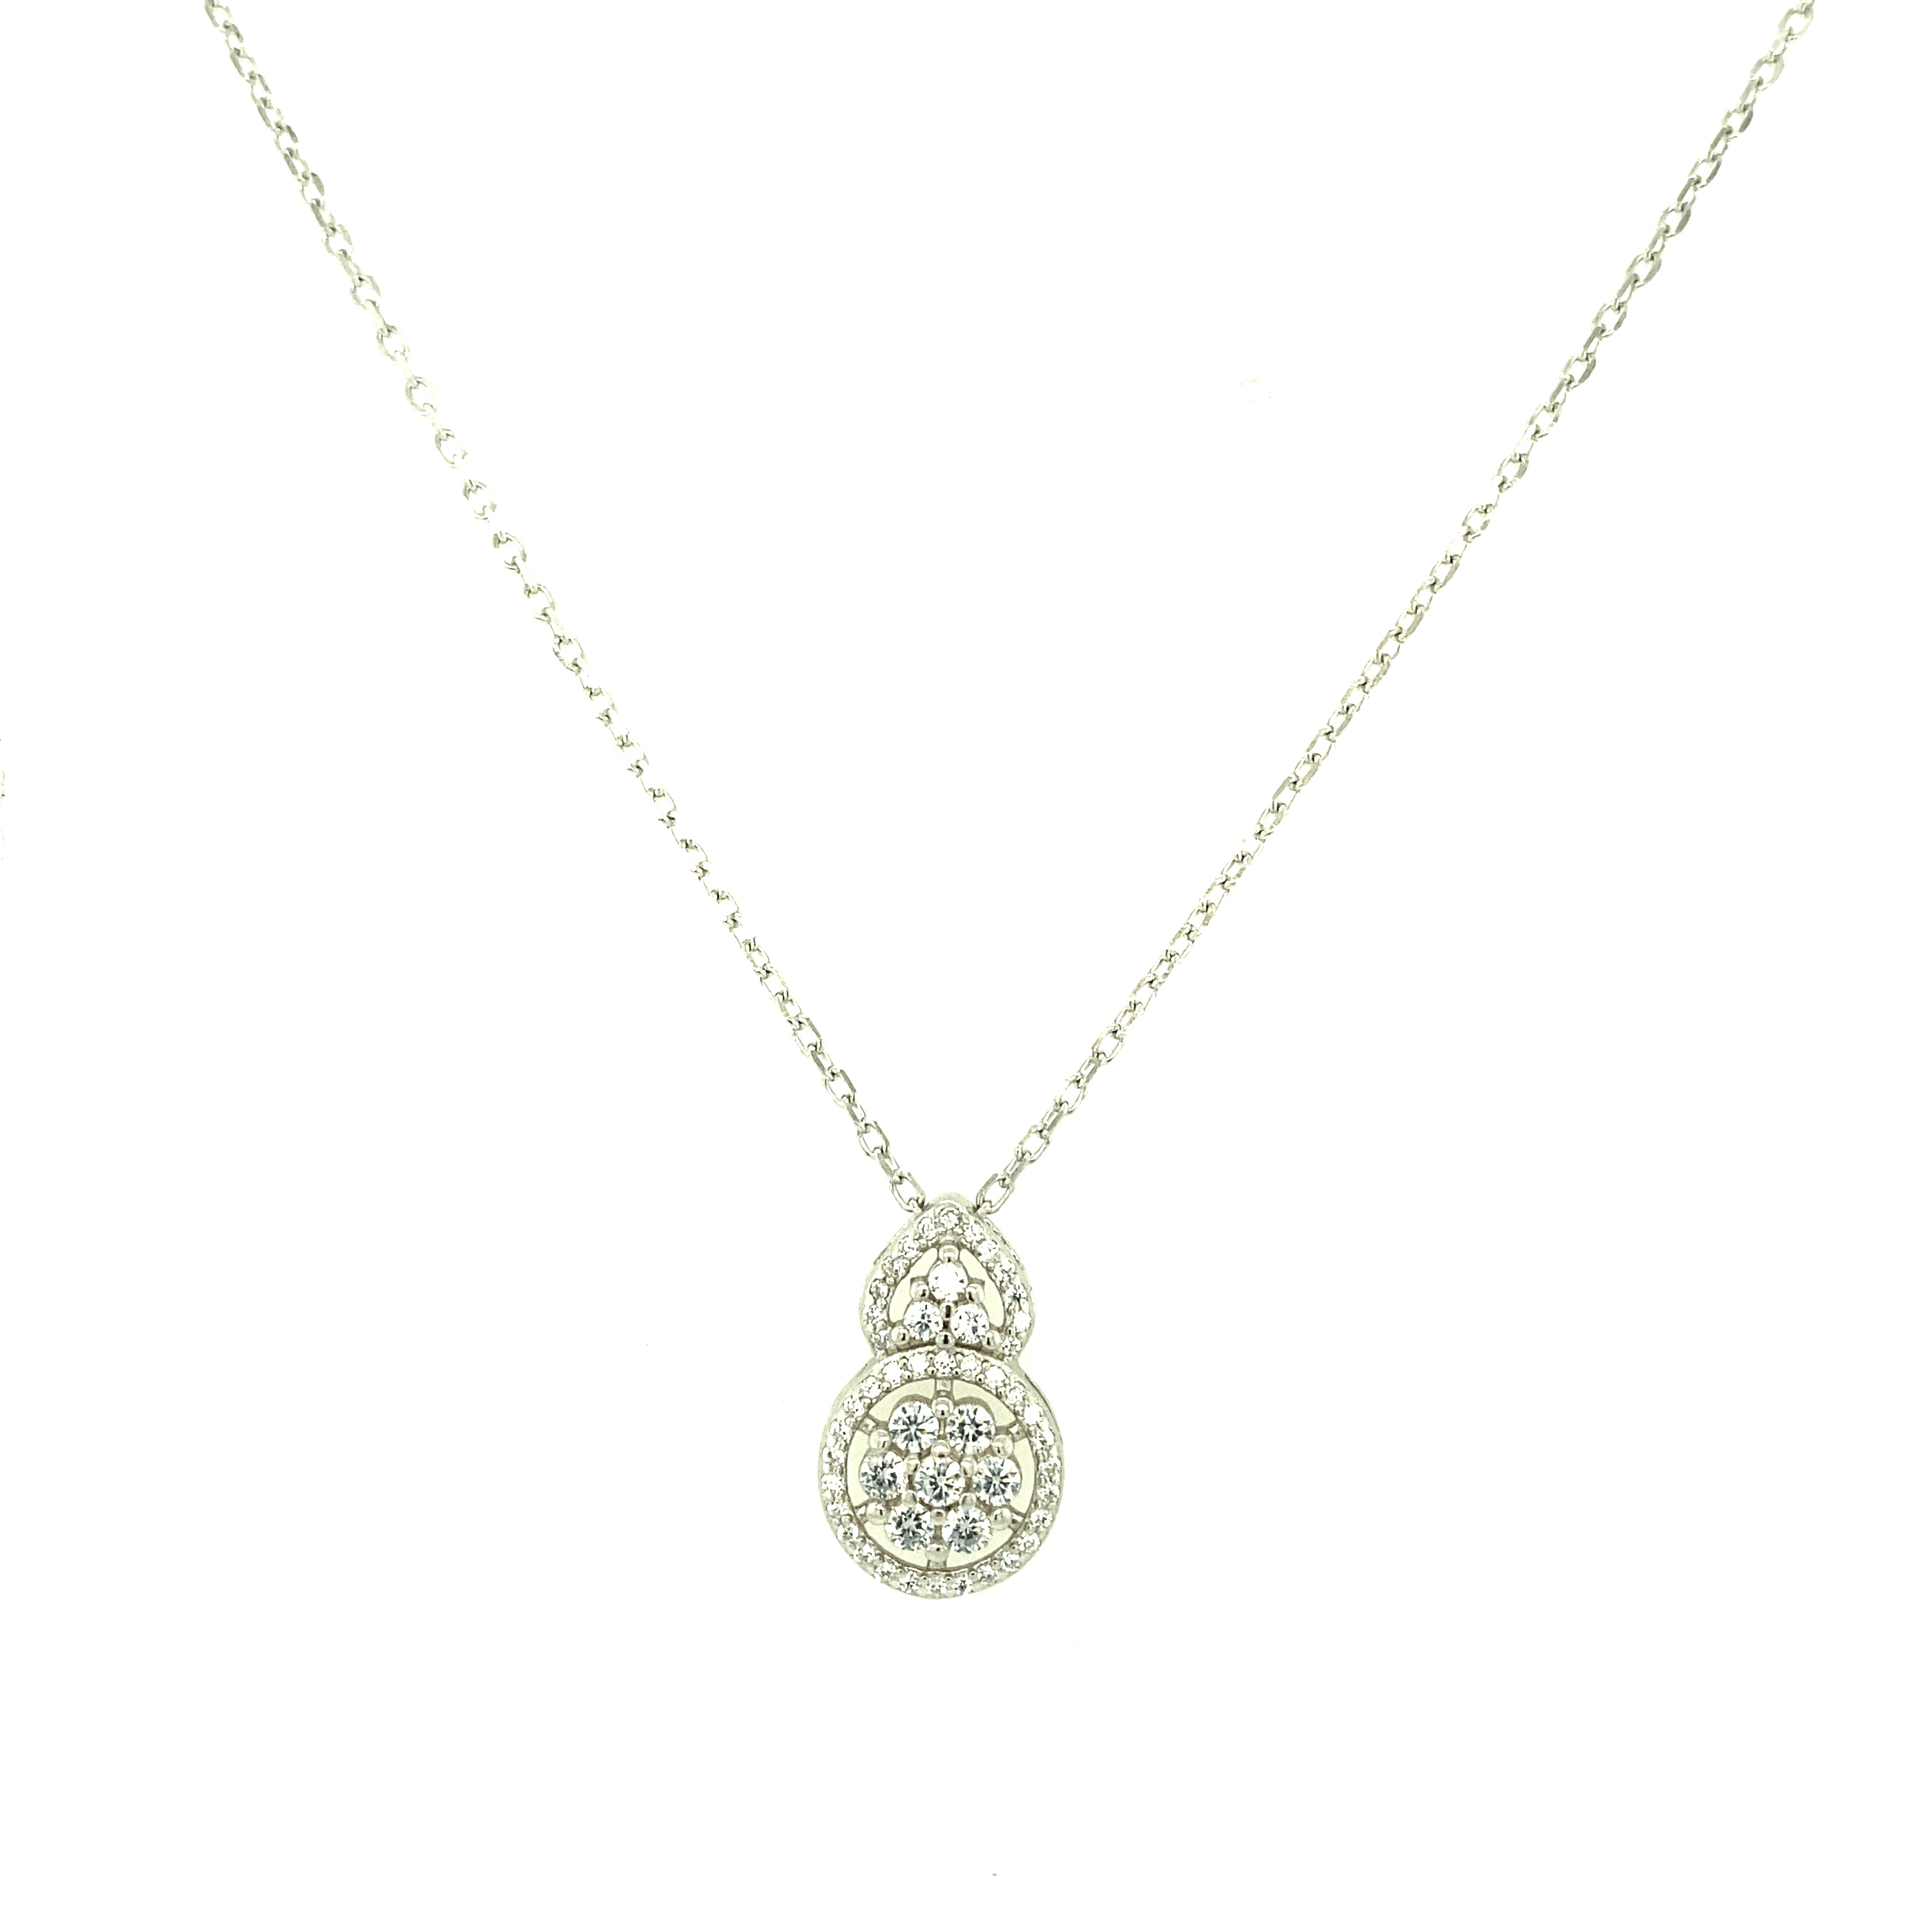 Asfour-Crystal-Silver-accessoriesNecklace-N1700-925-Sterling-Silver